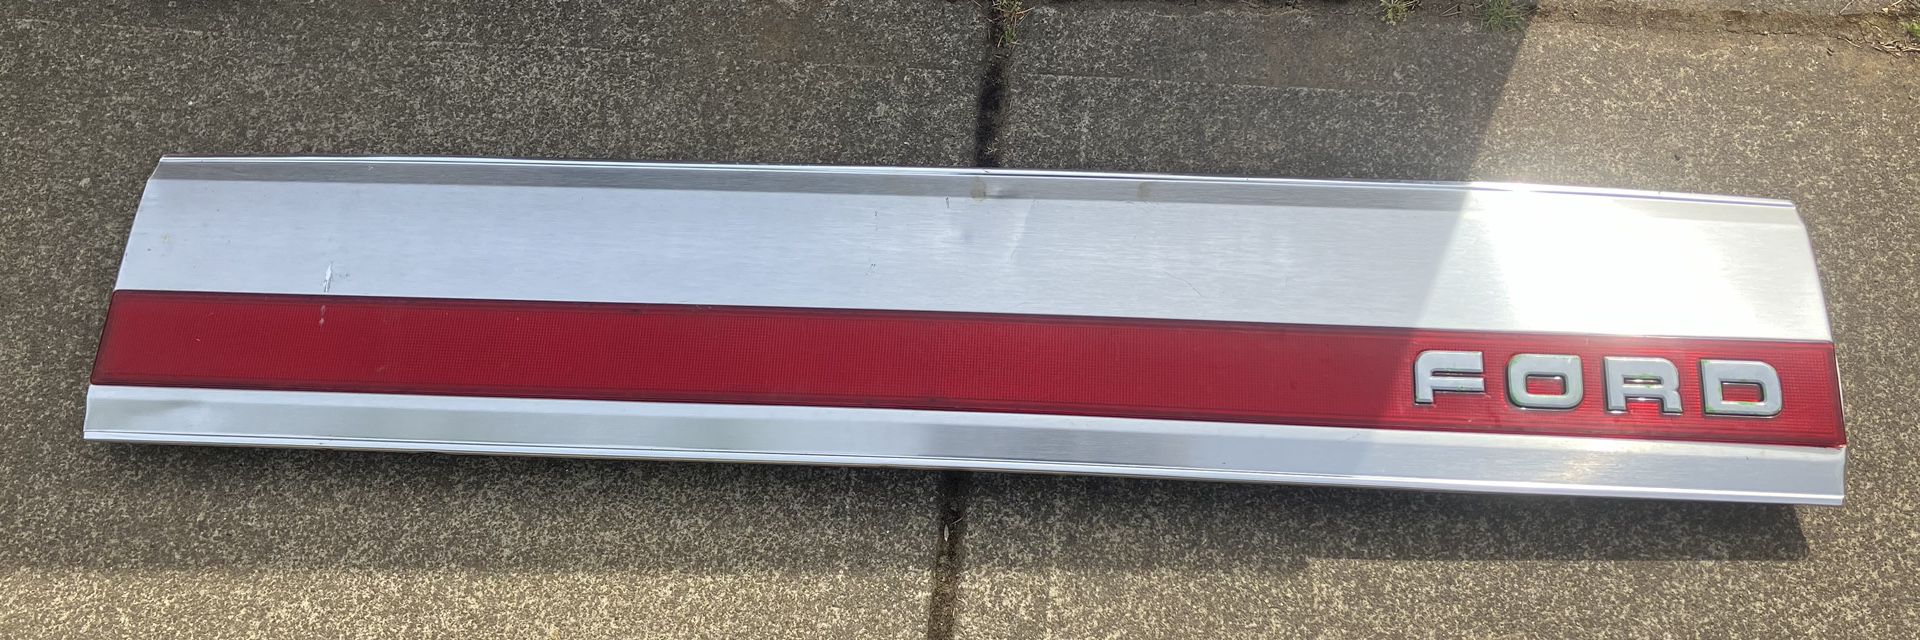 Ford OBS Truck Tailgate Insert - Red/Brushed Aluminum